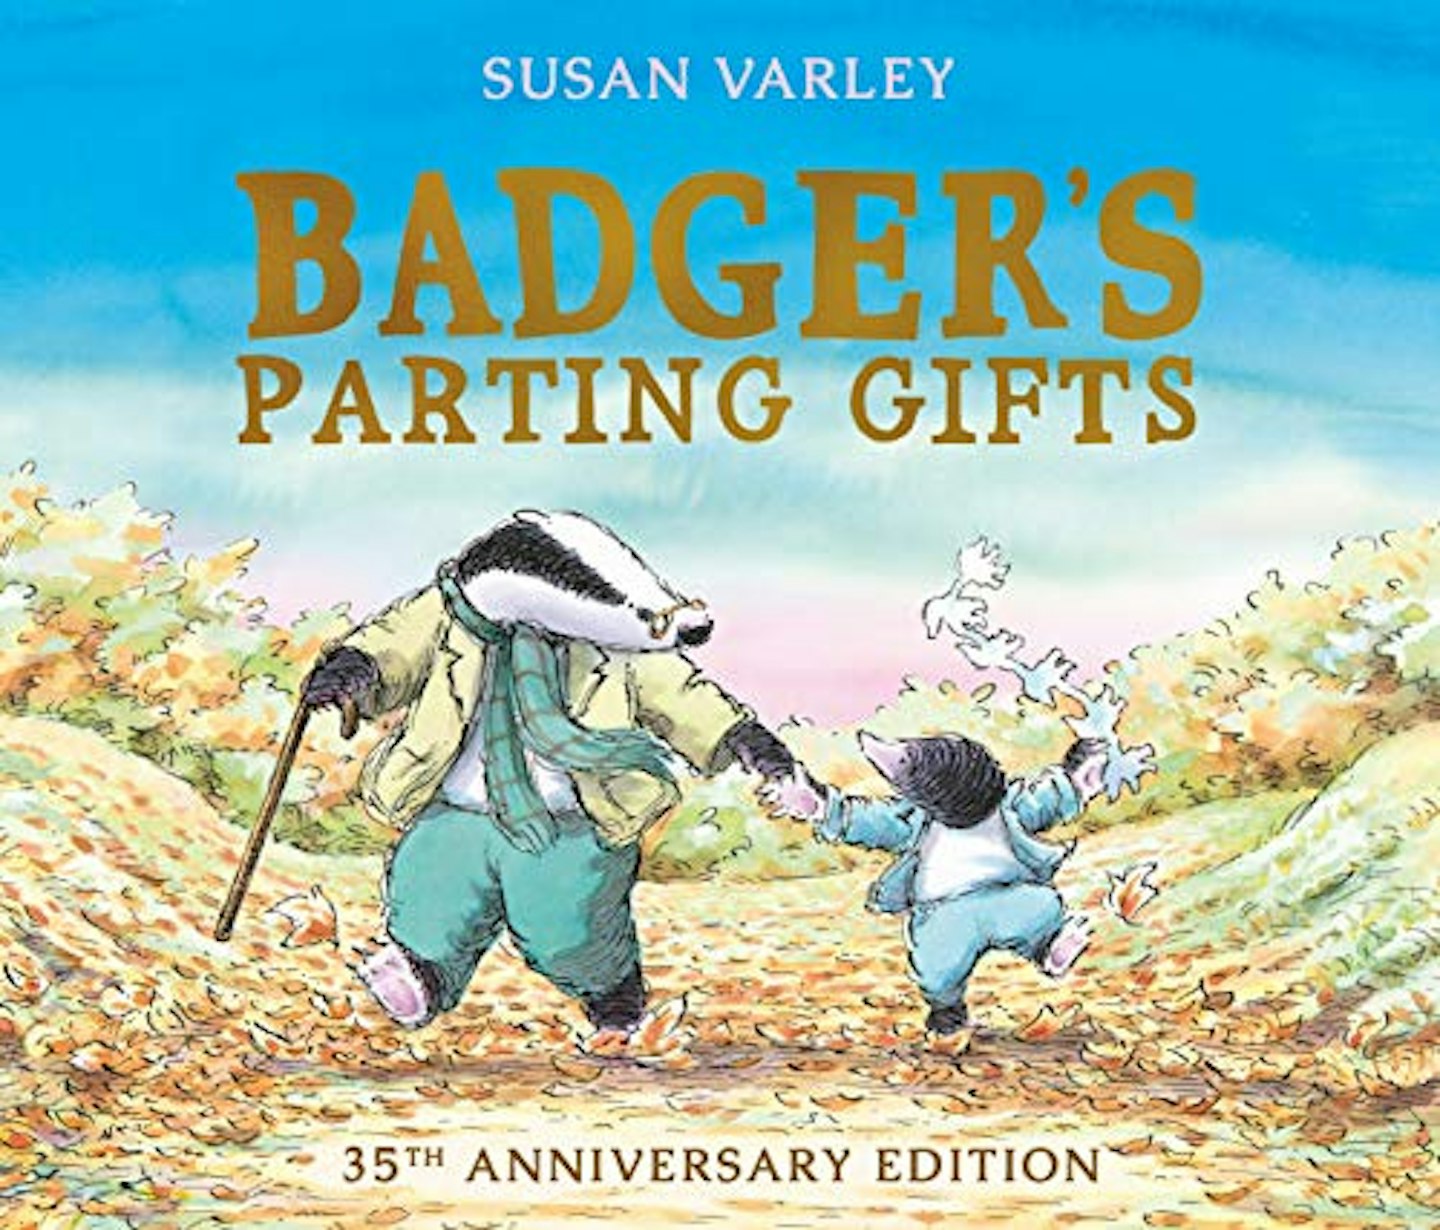 Badger's Parting Gifts by Susan Varly